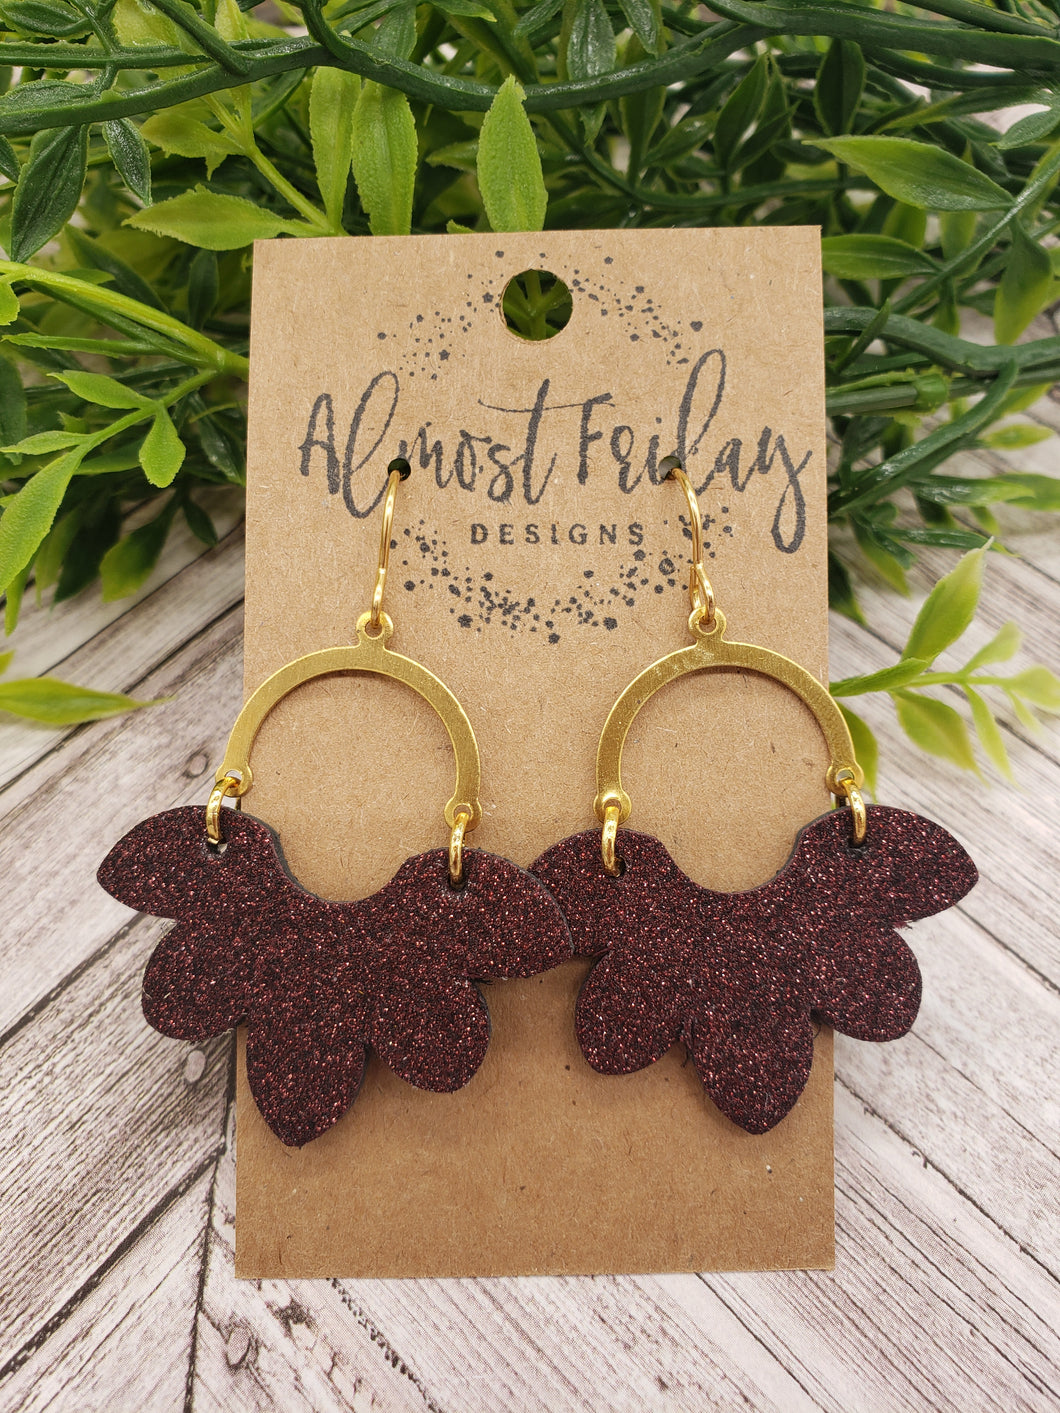 Genuine Leather Earrings - Petal - Scallop - Gold Earrings - Burgundy - Glitter Earrings - Statement Earrings - Arch Connector